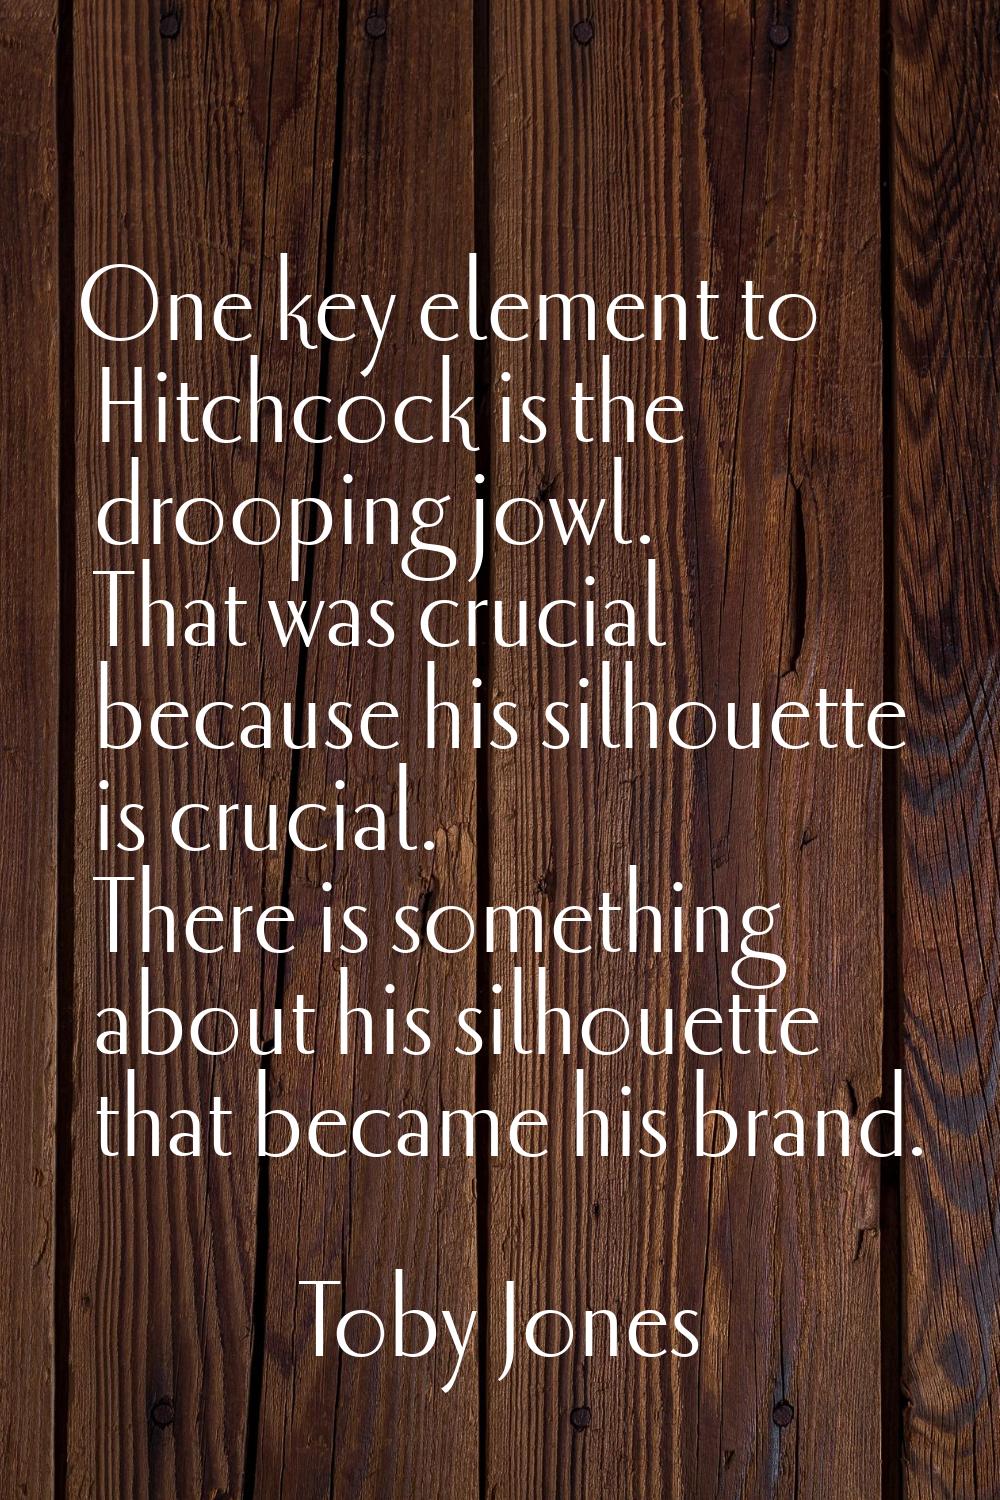 One key element to Hitchcock is the drooping jowl. That was crucial because his silhouette is cruci